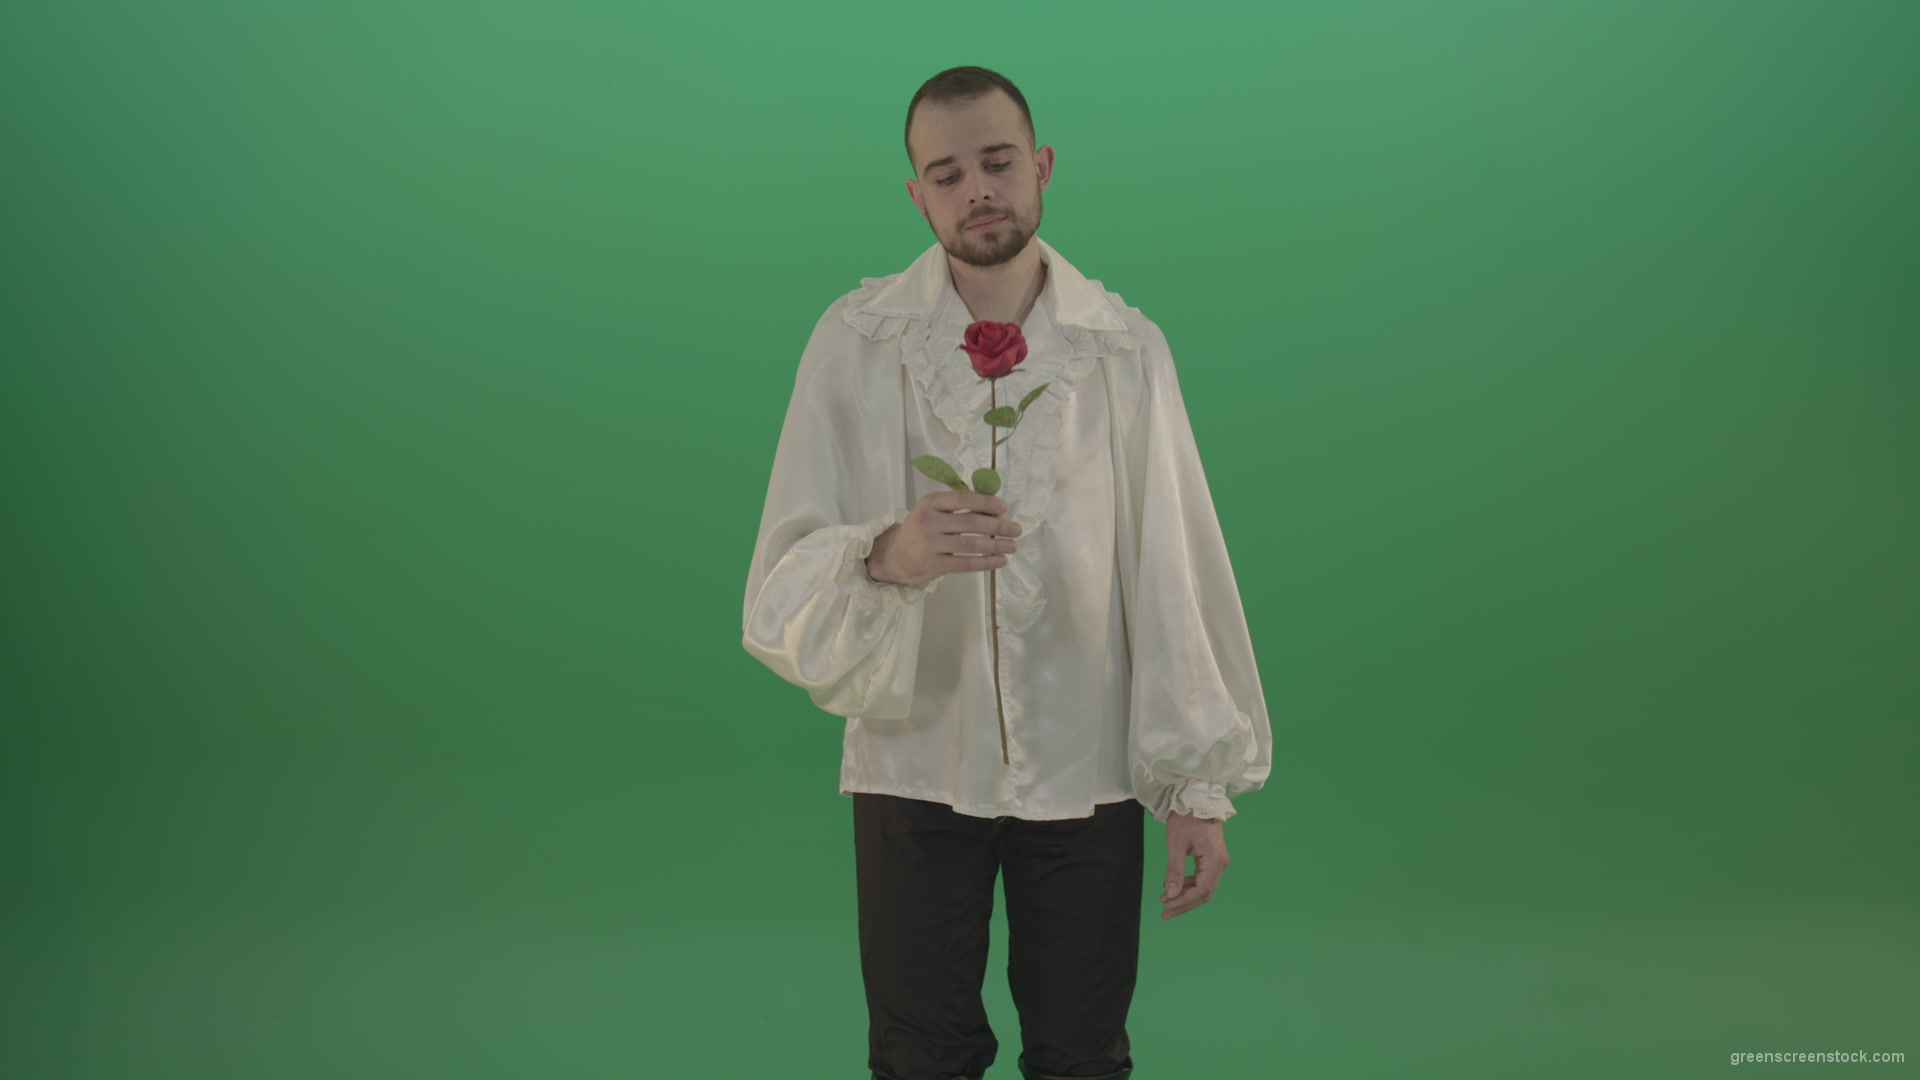 Glancing-at-the-red-flower-the-guy-gives-love-rose-to-camera-isolated-on-green-screen_002 Green Screen Stock